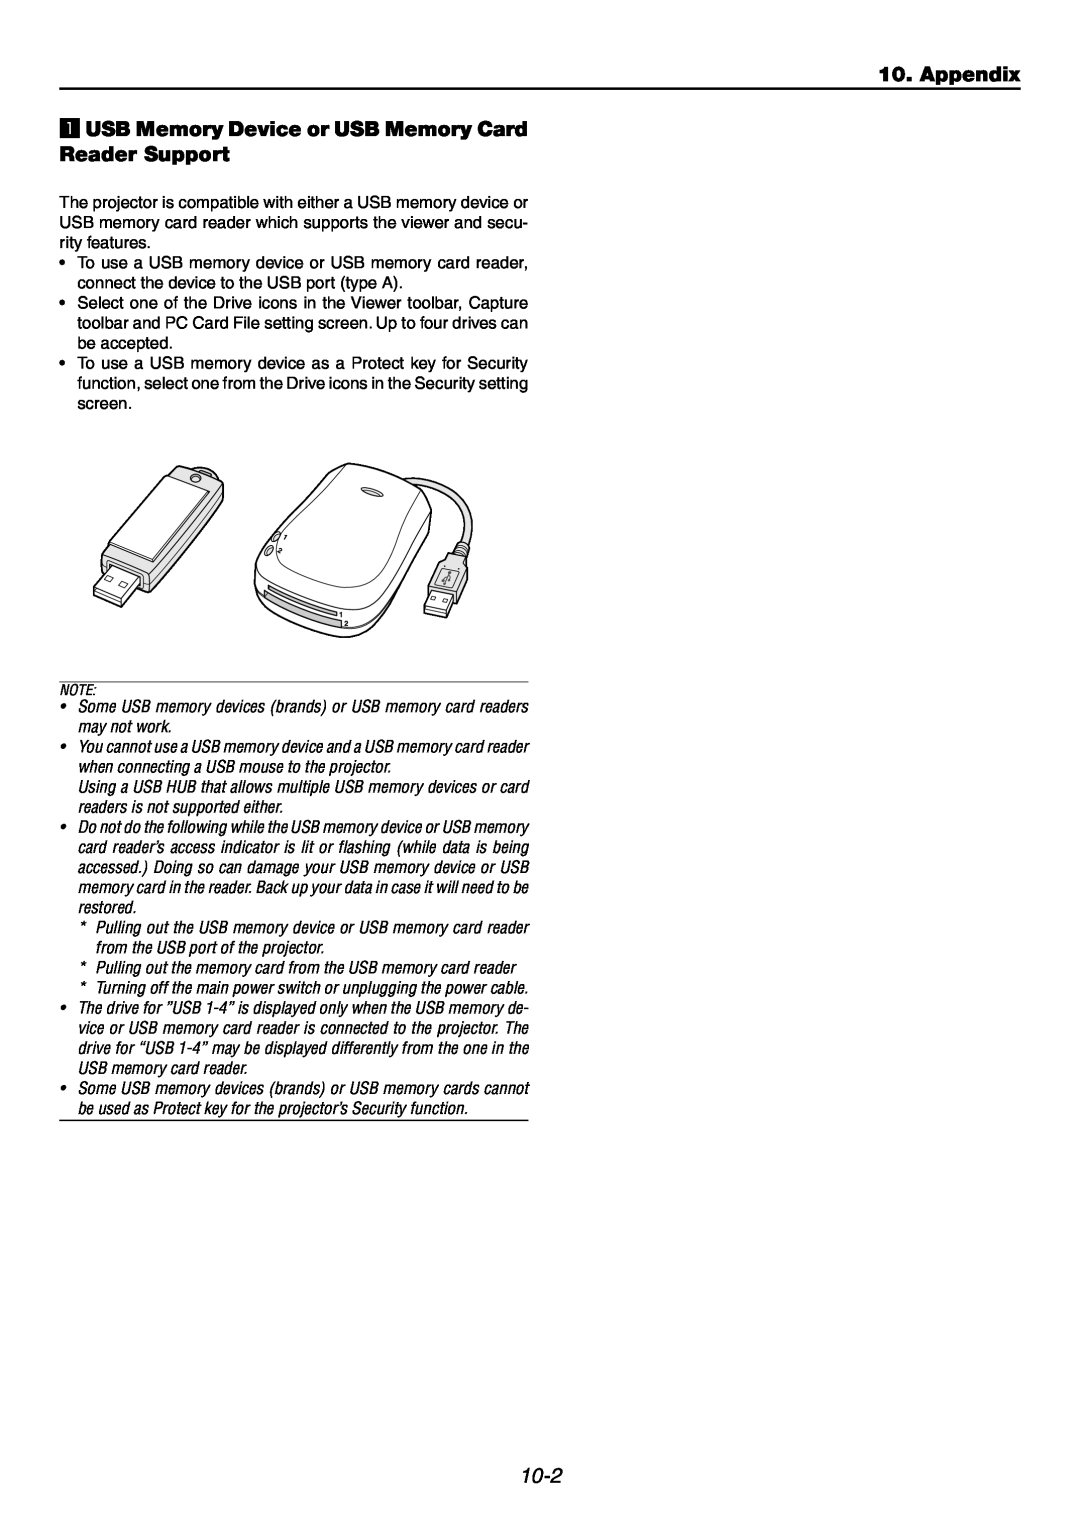 NEC GT6000 user manual Appendix, z USB Memory Device or USB Memory Card, Reader Support, 10-2 